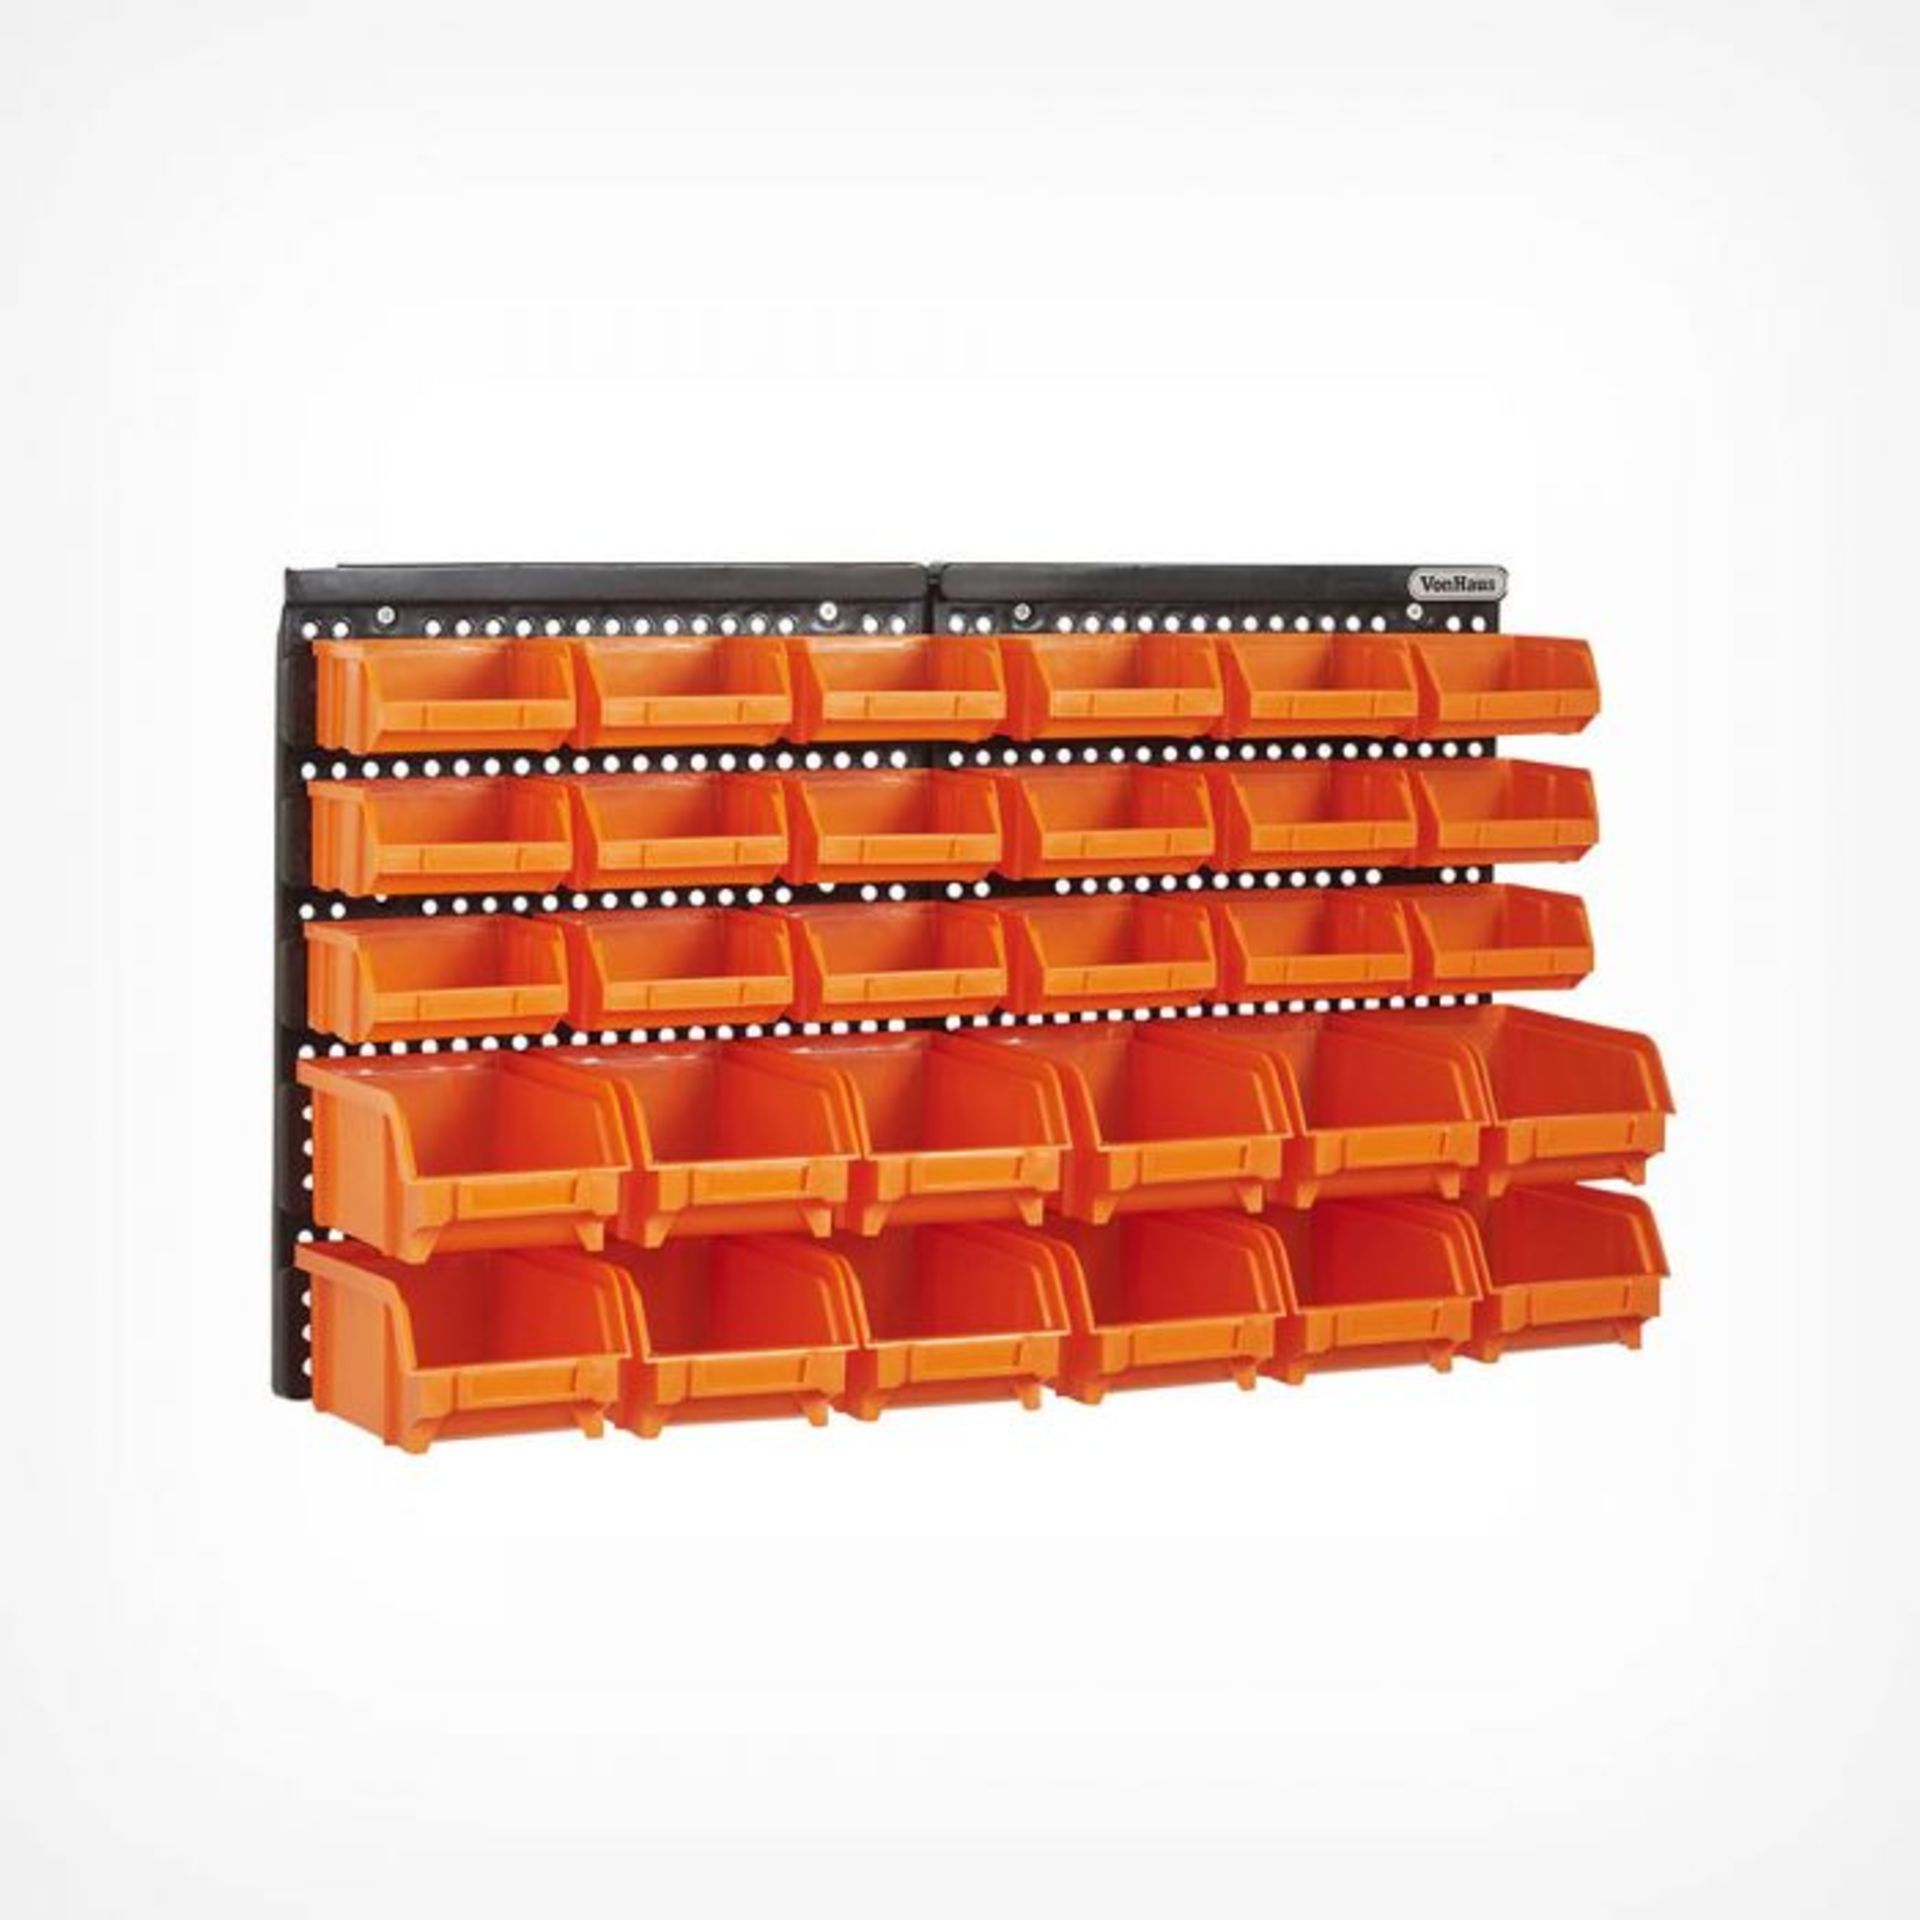 30pc DIY Organiser. Keep your workspace safe, tidy and organised with the luxury 30pc Wall Mounted